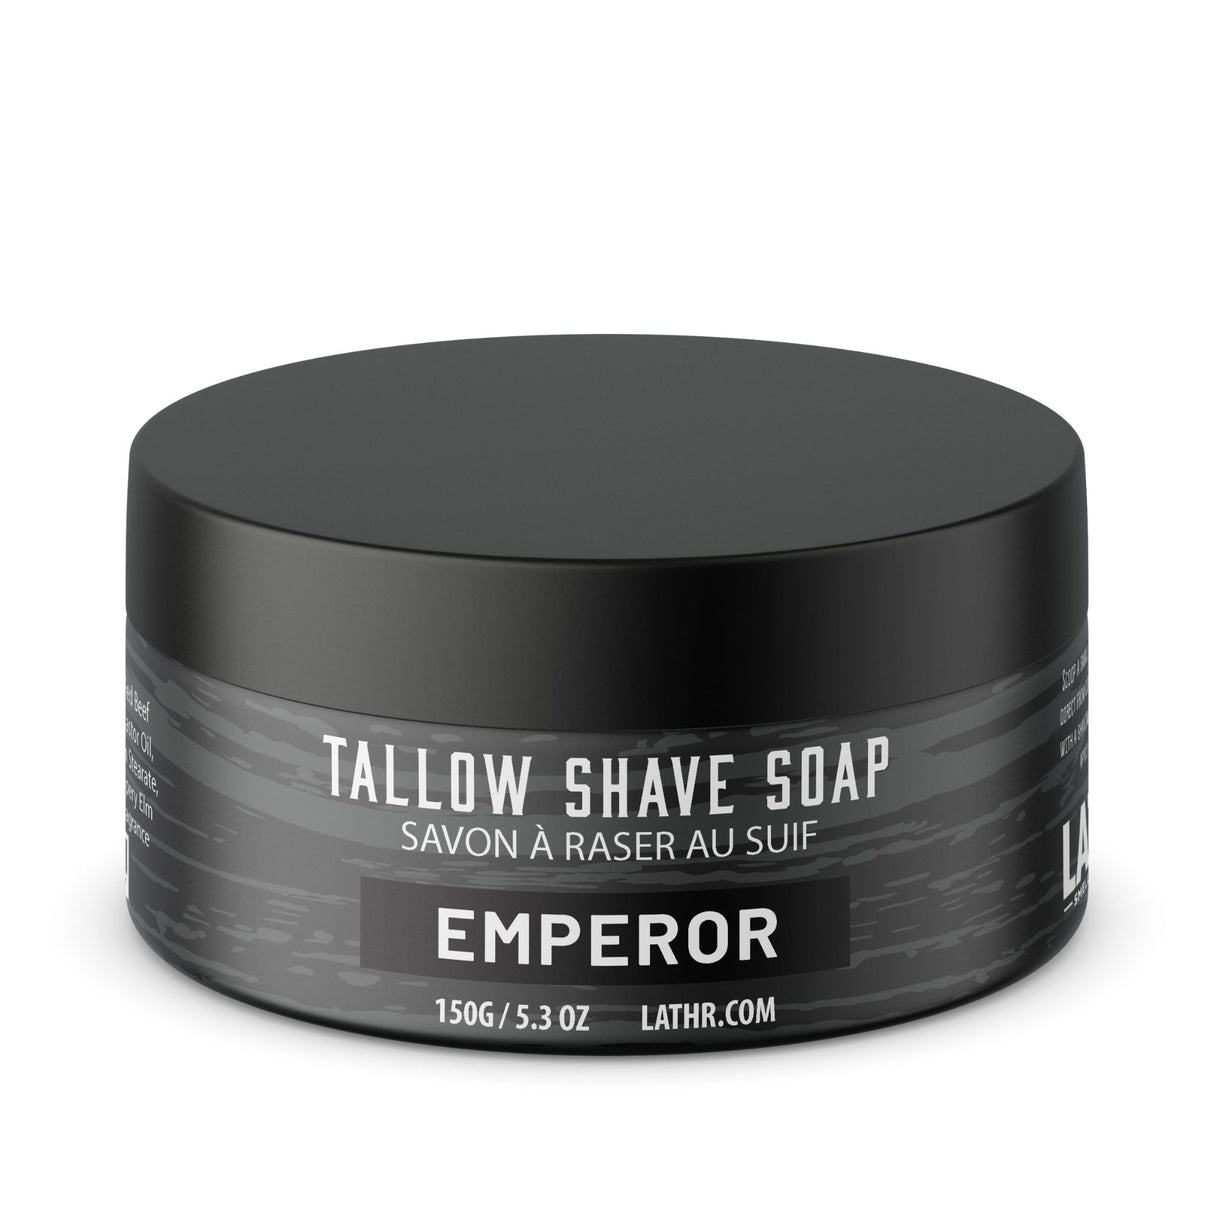 Tallow Shave Soap - Emperor